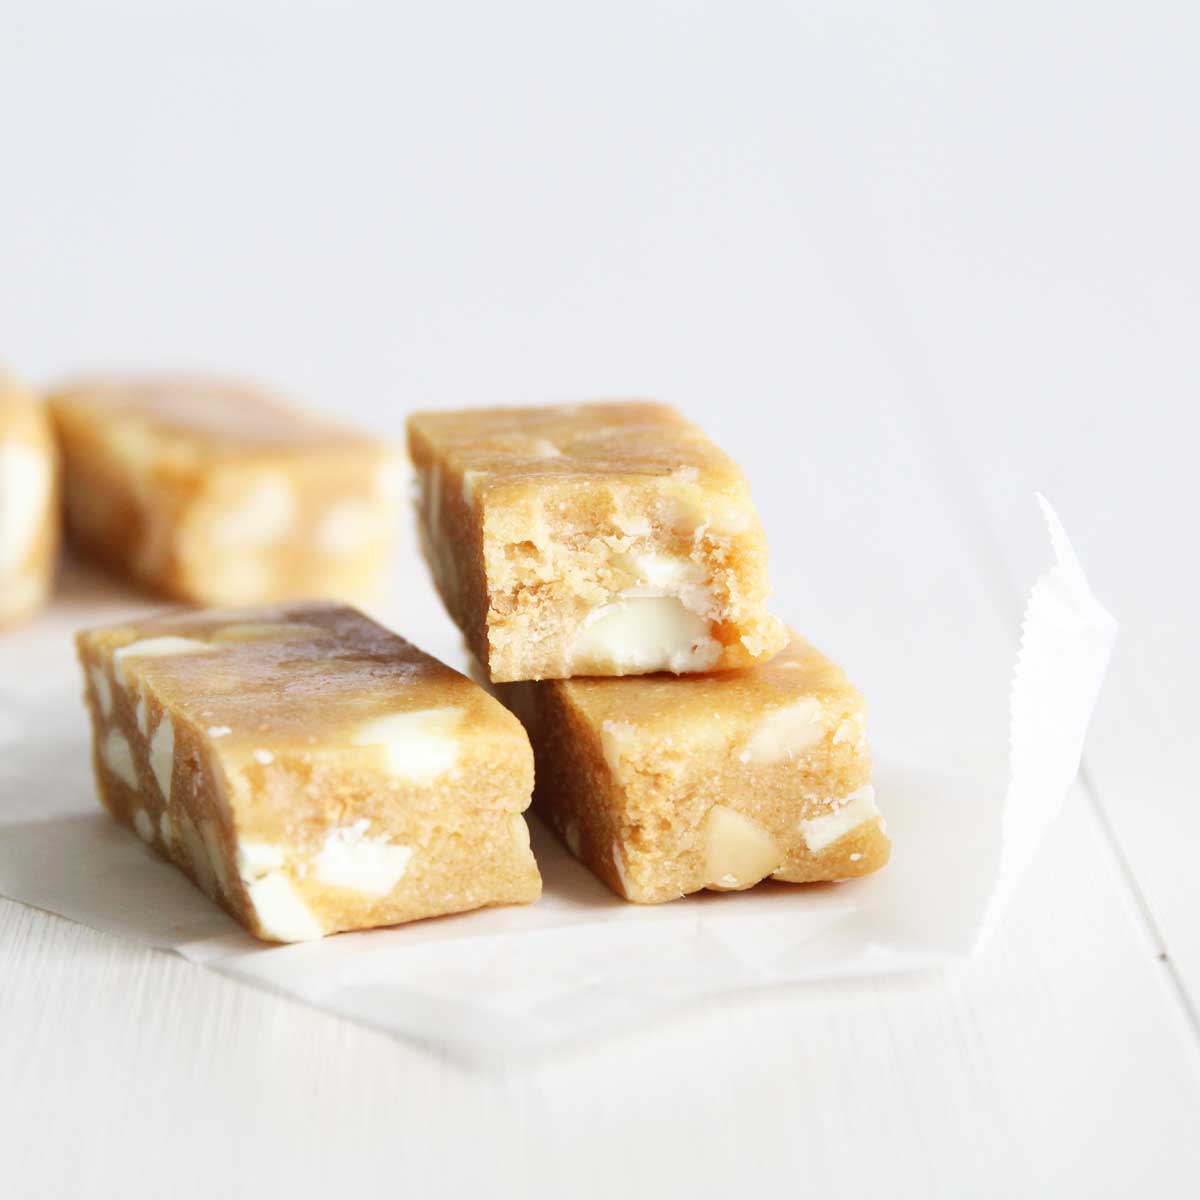 Chunky White Chocolate Macadamia Protein Bars Recipe (made with Collagen Peptides) - sweet potato mochi